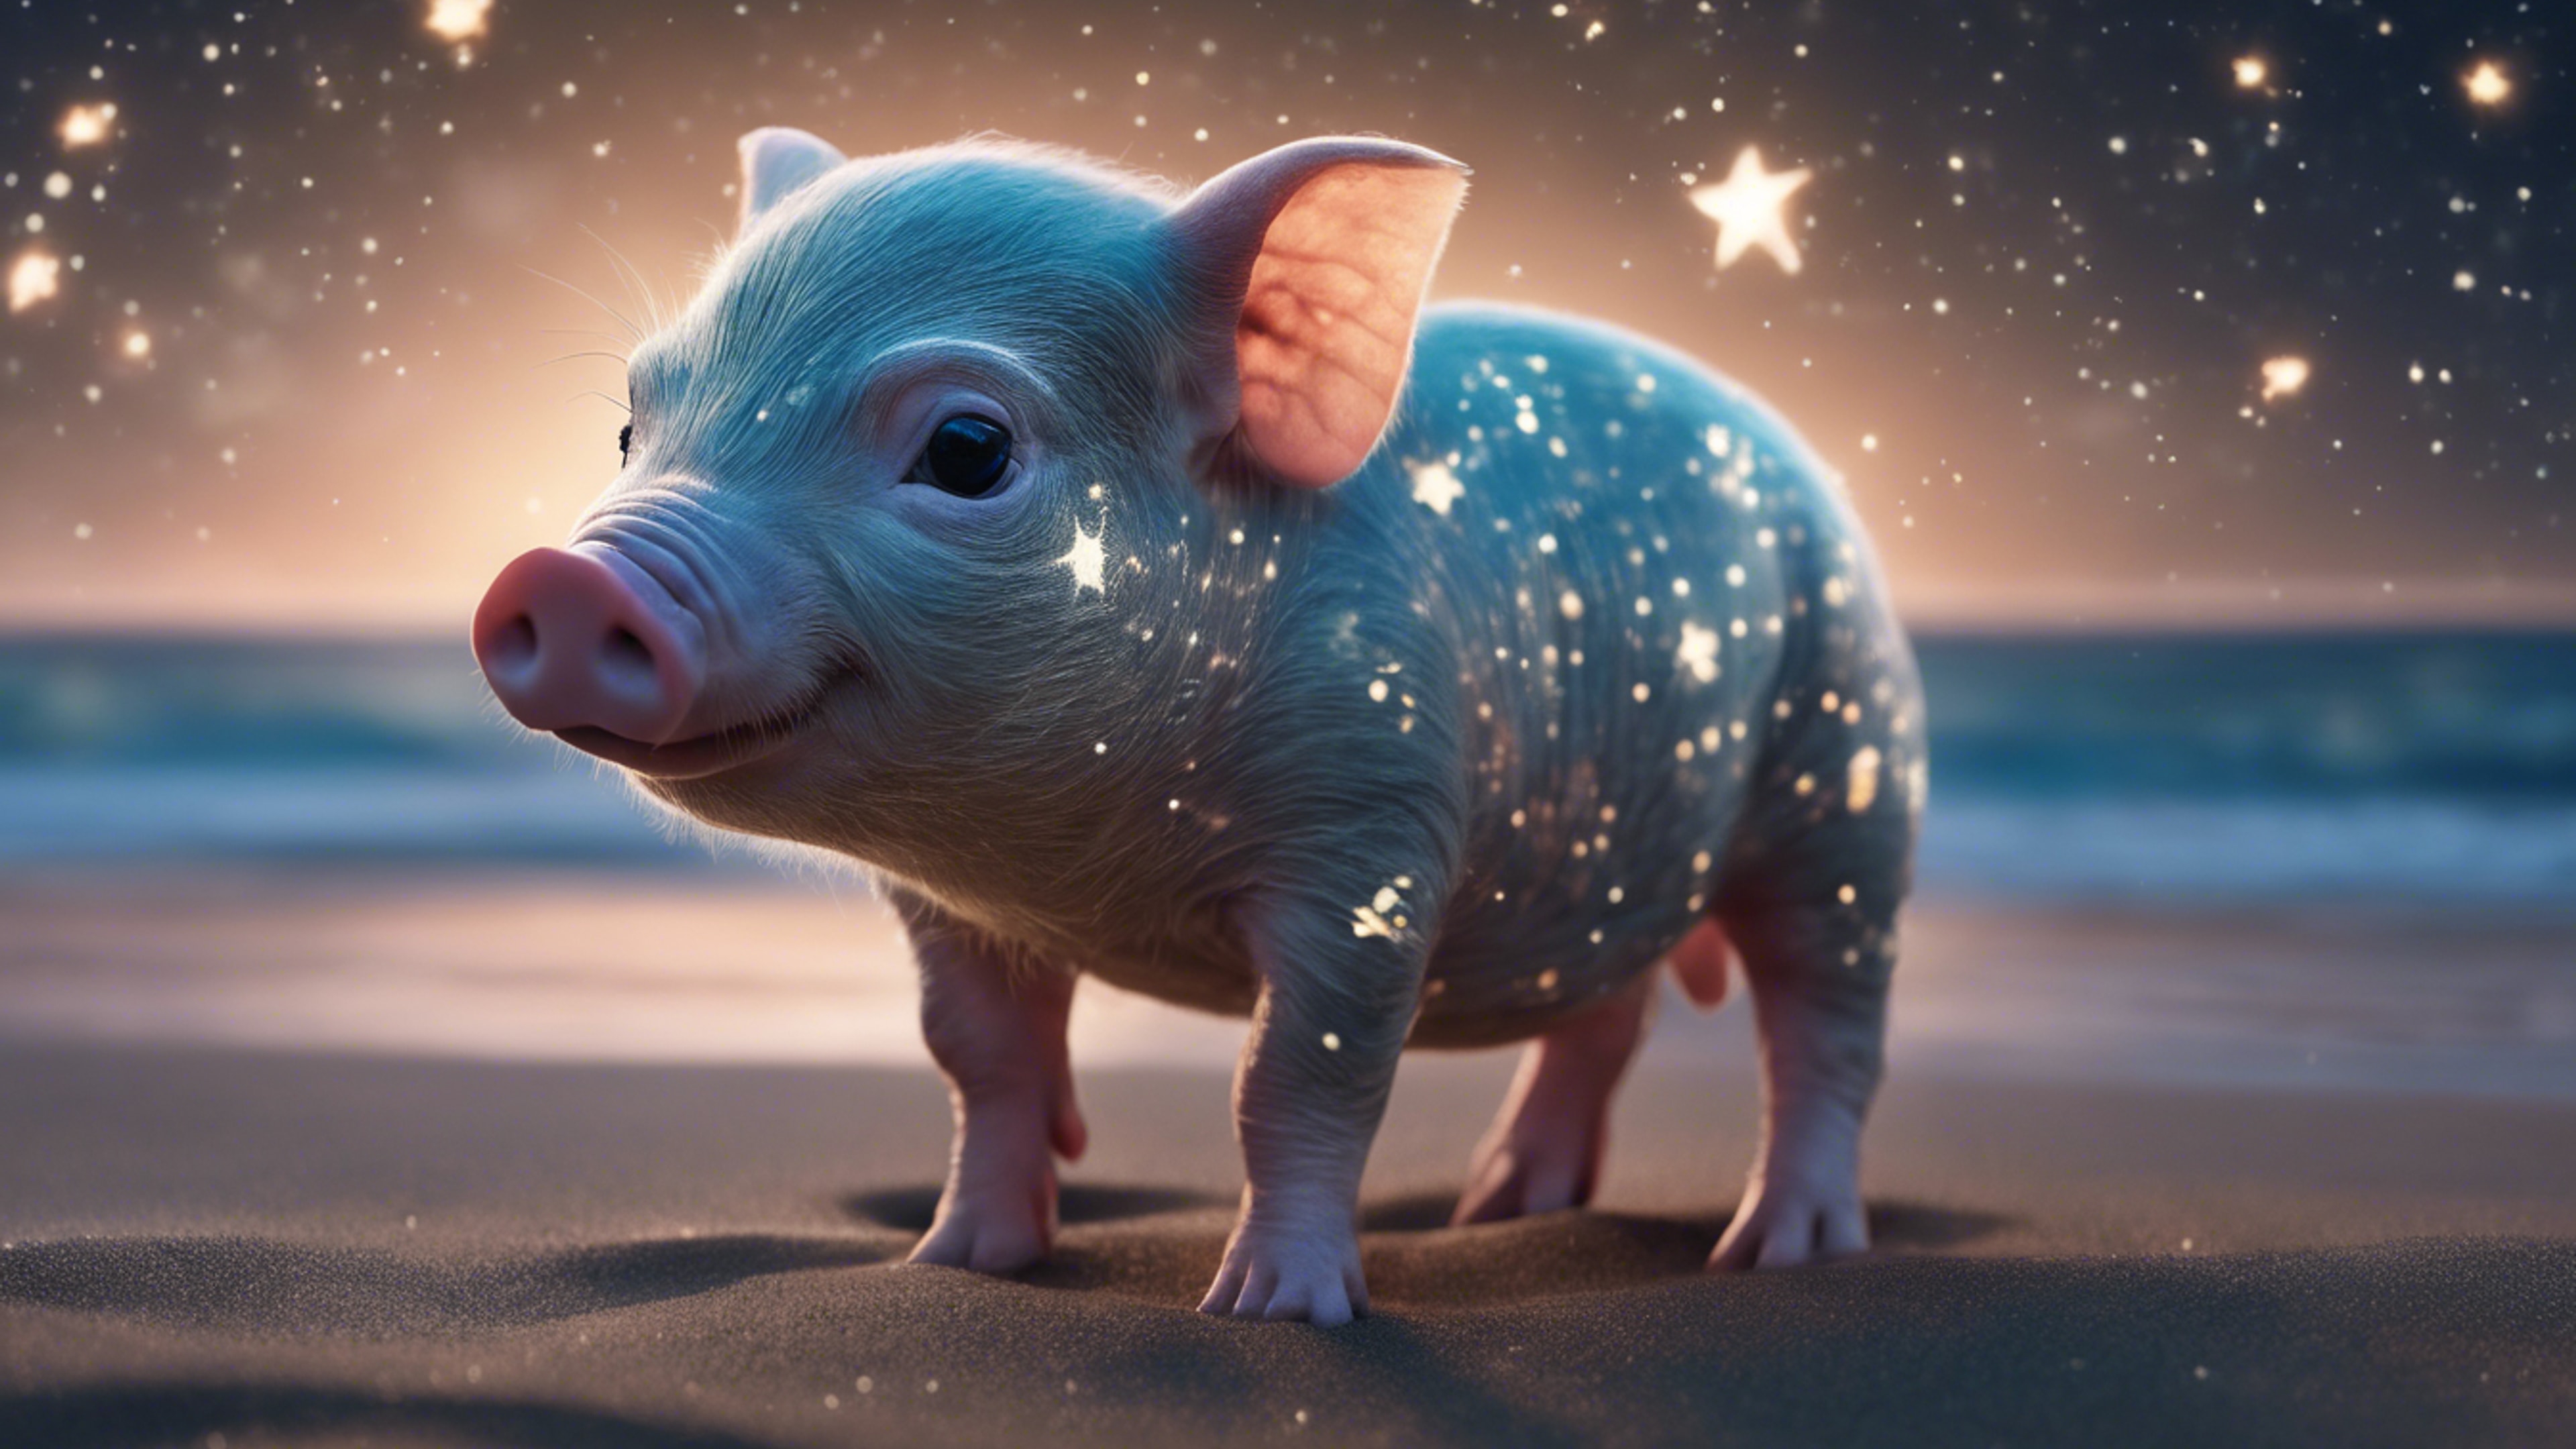 An unique digital rendering of a bioluminescent piglet on a calm beach under starry night sky. Papel de parede[597018af159c4f7fa895]